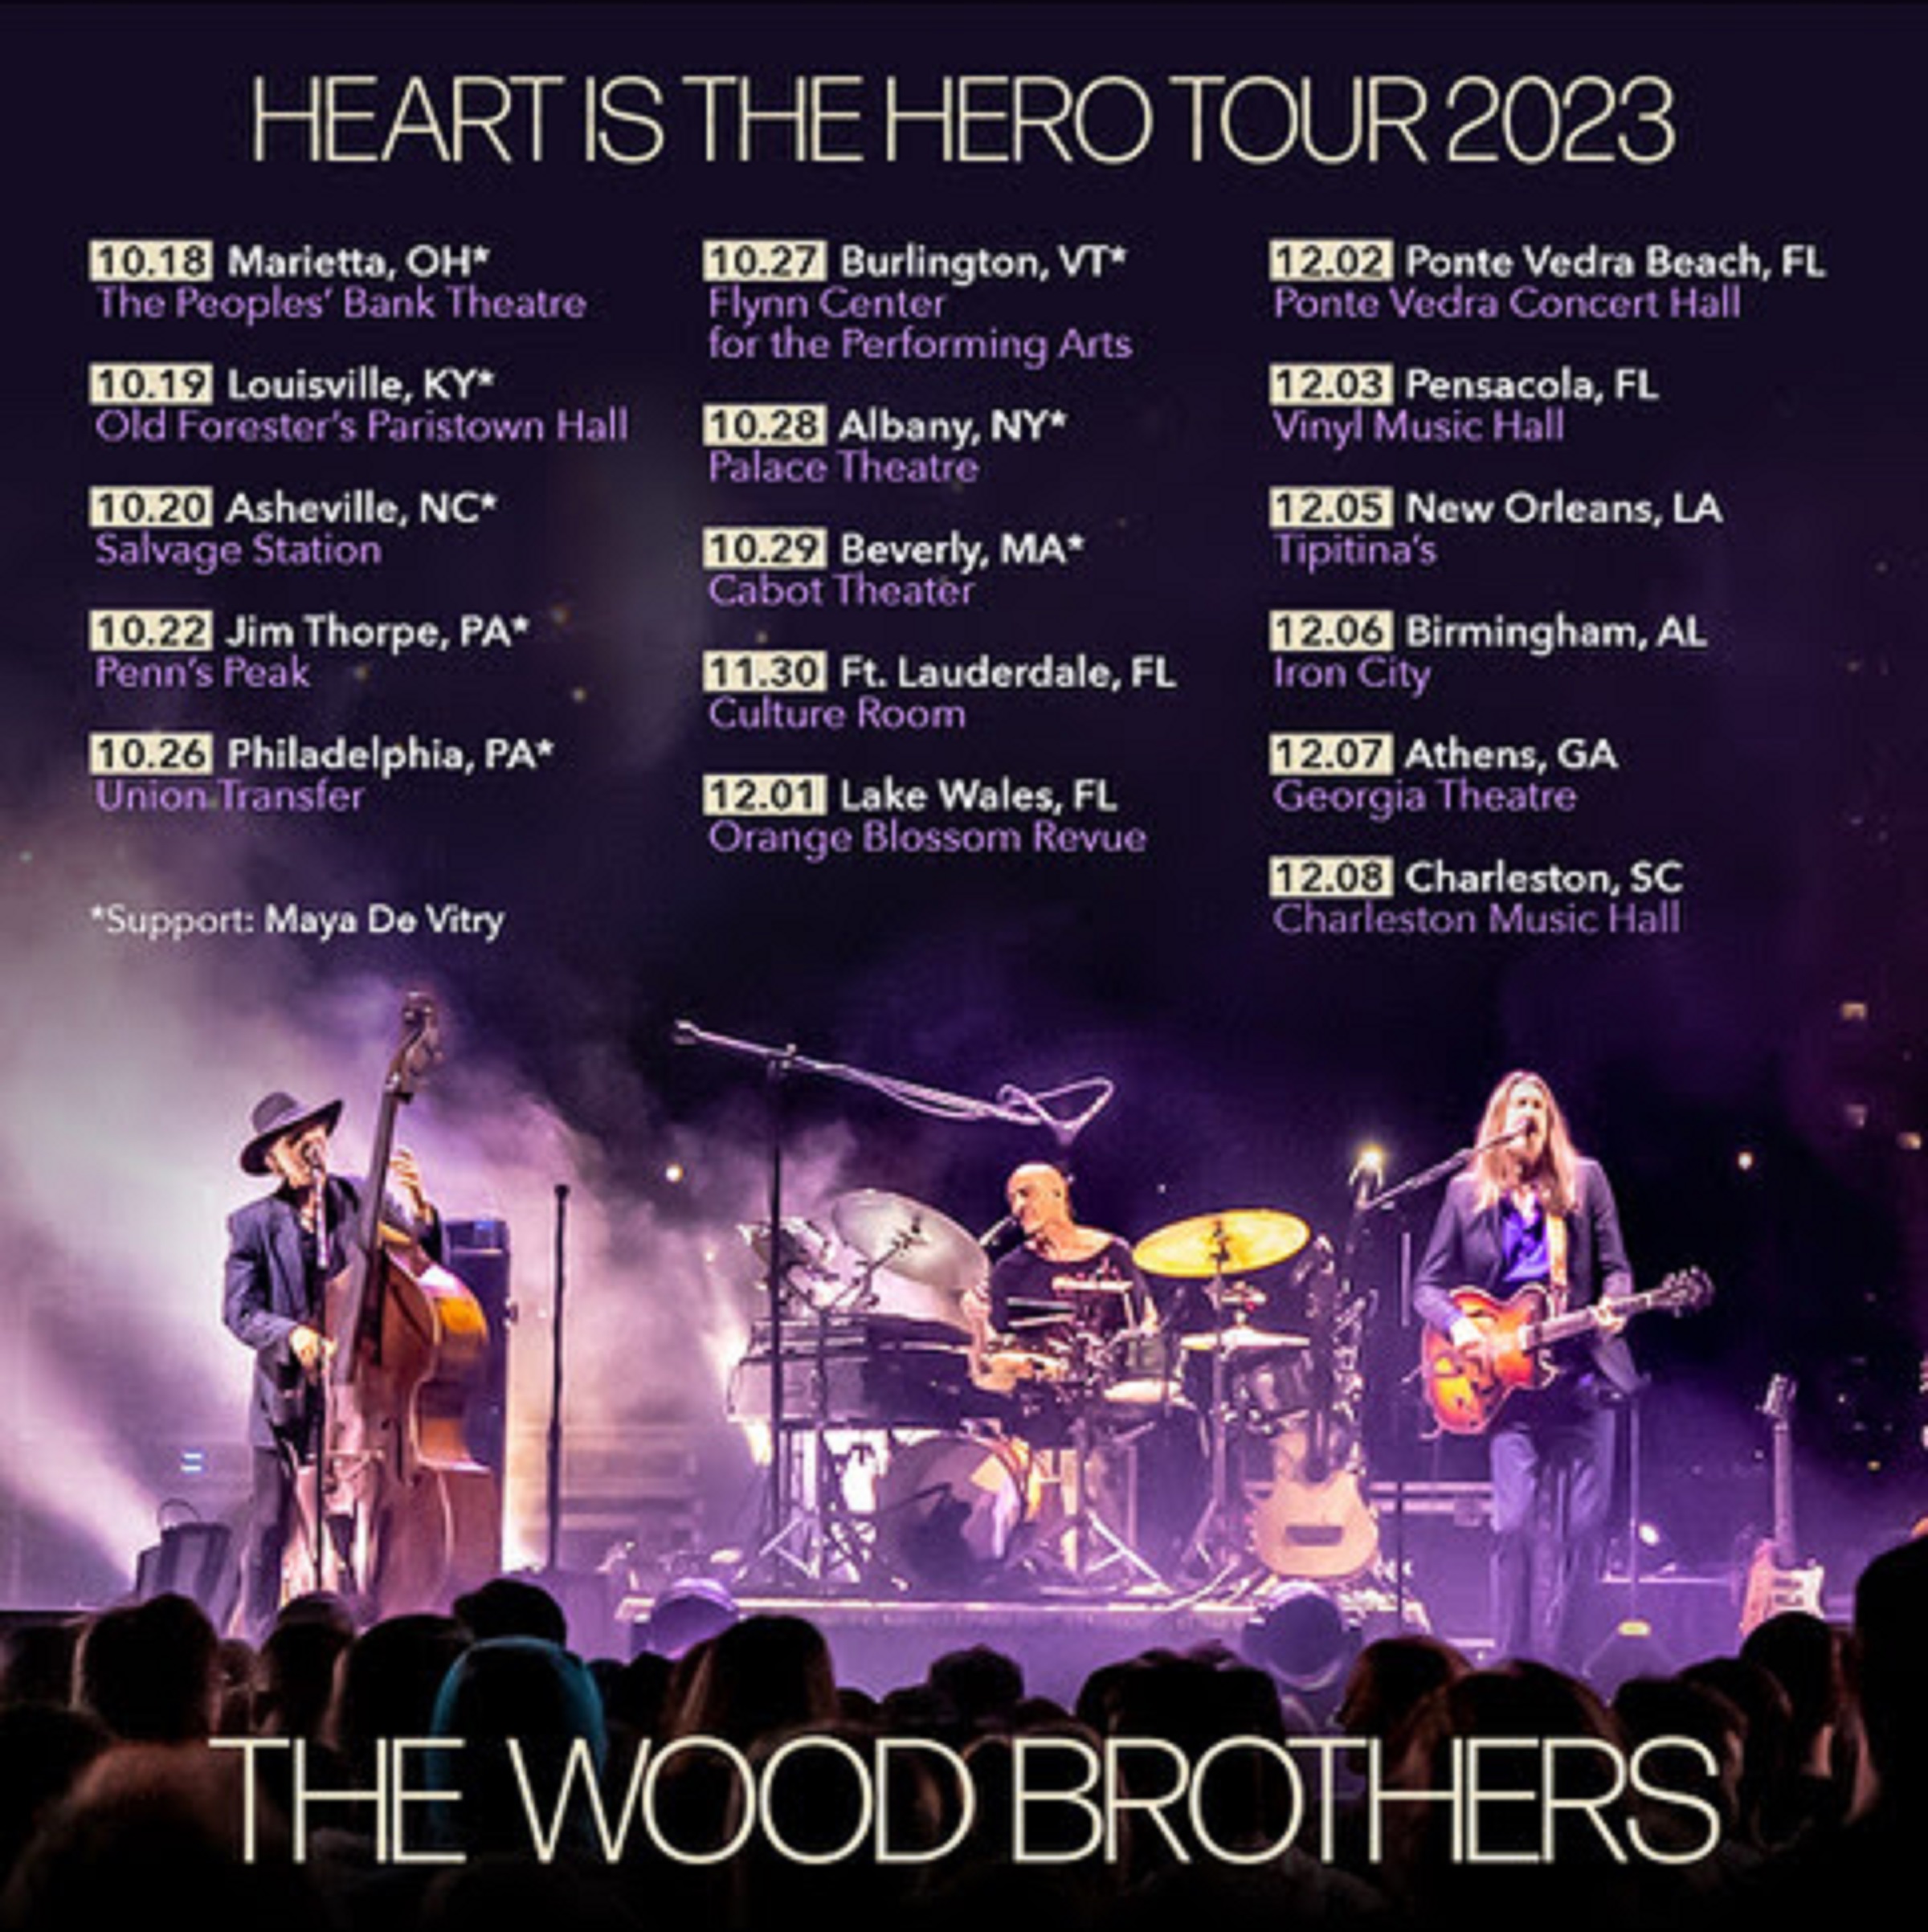 The Wood Brothers Announce Fall 2023 Tour Dates